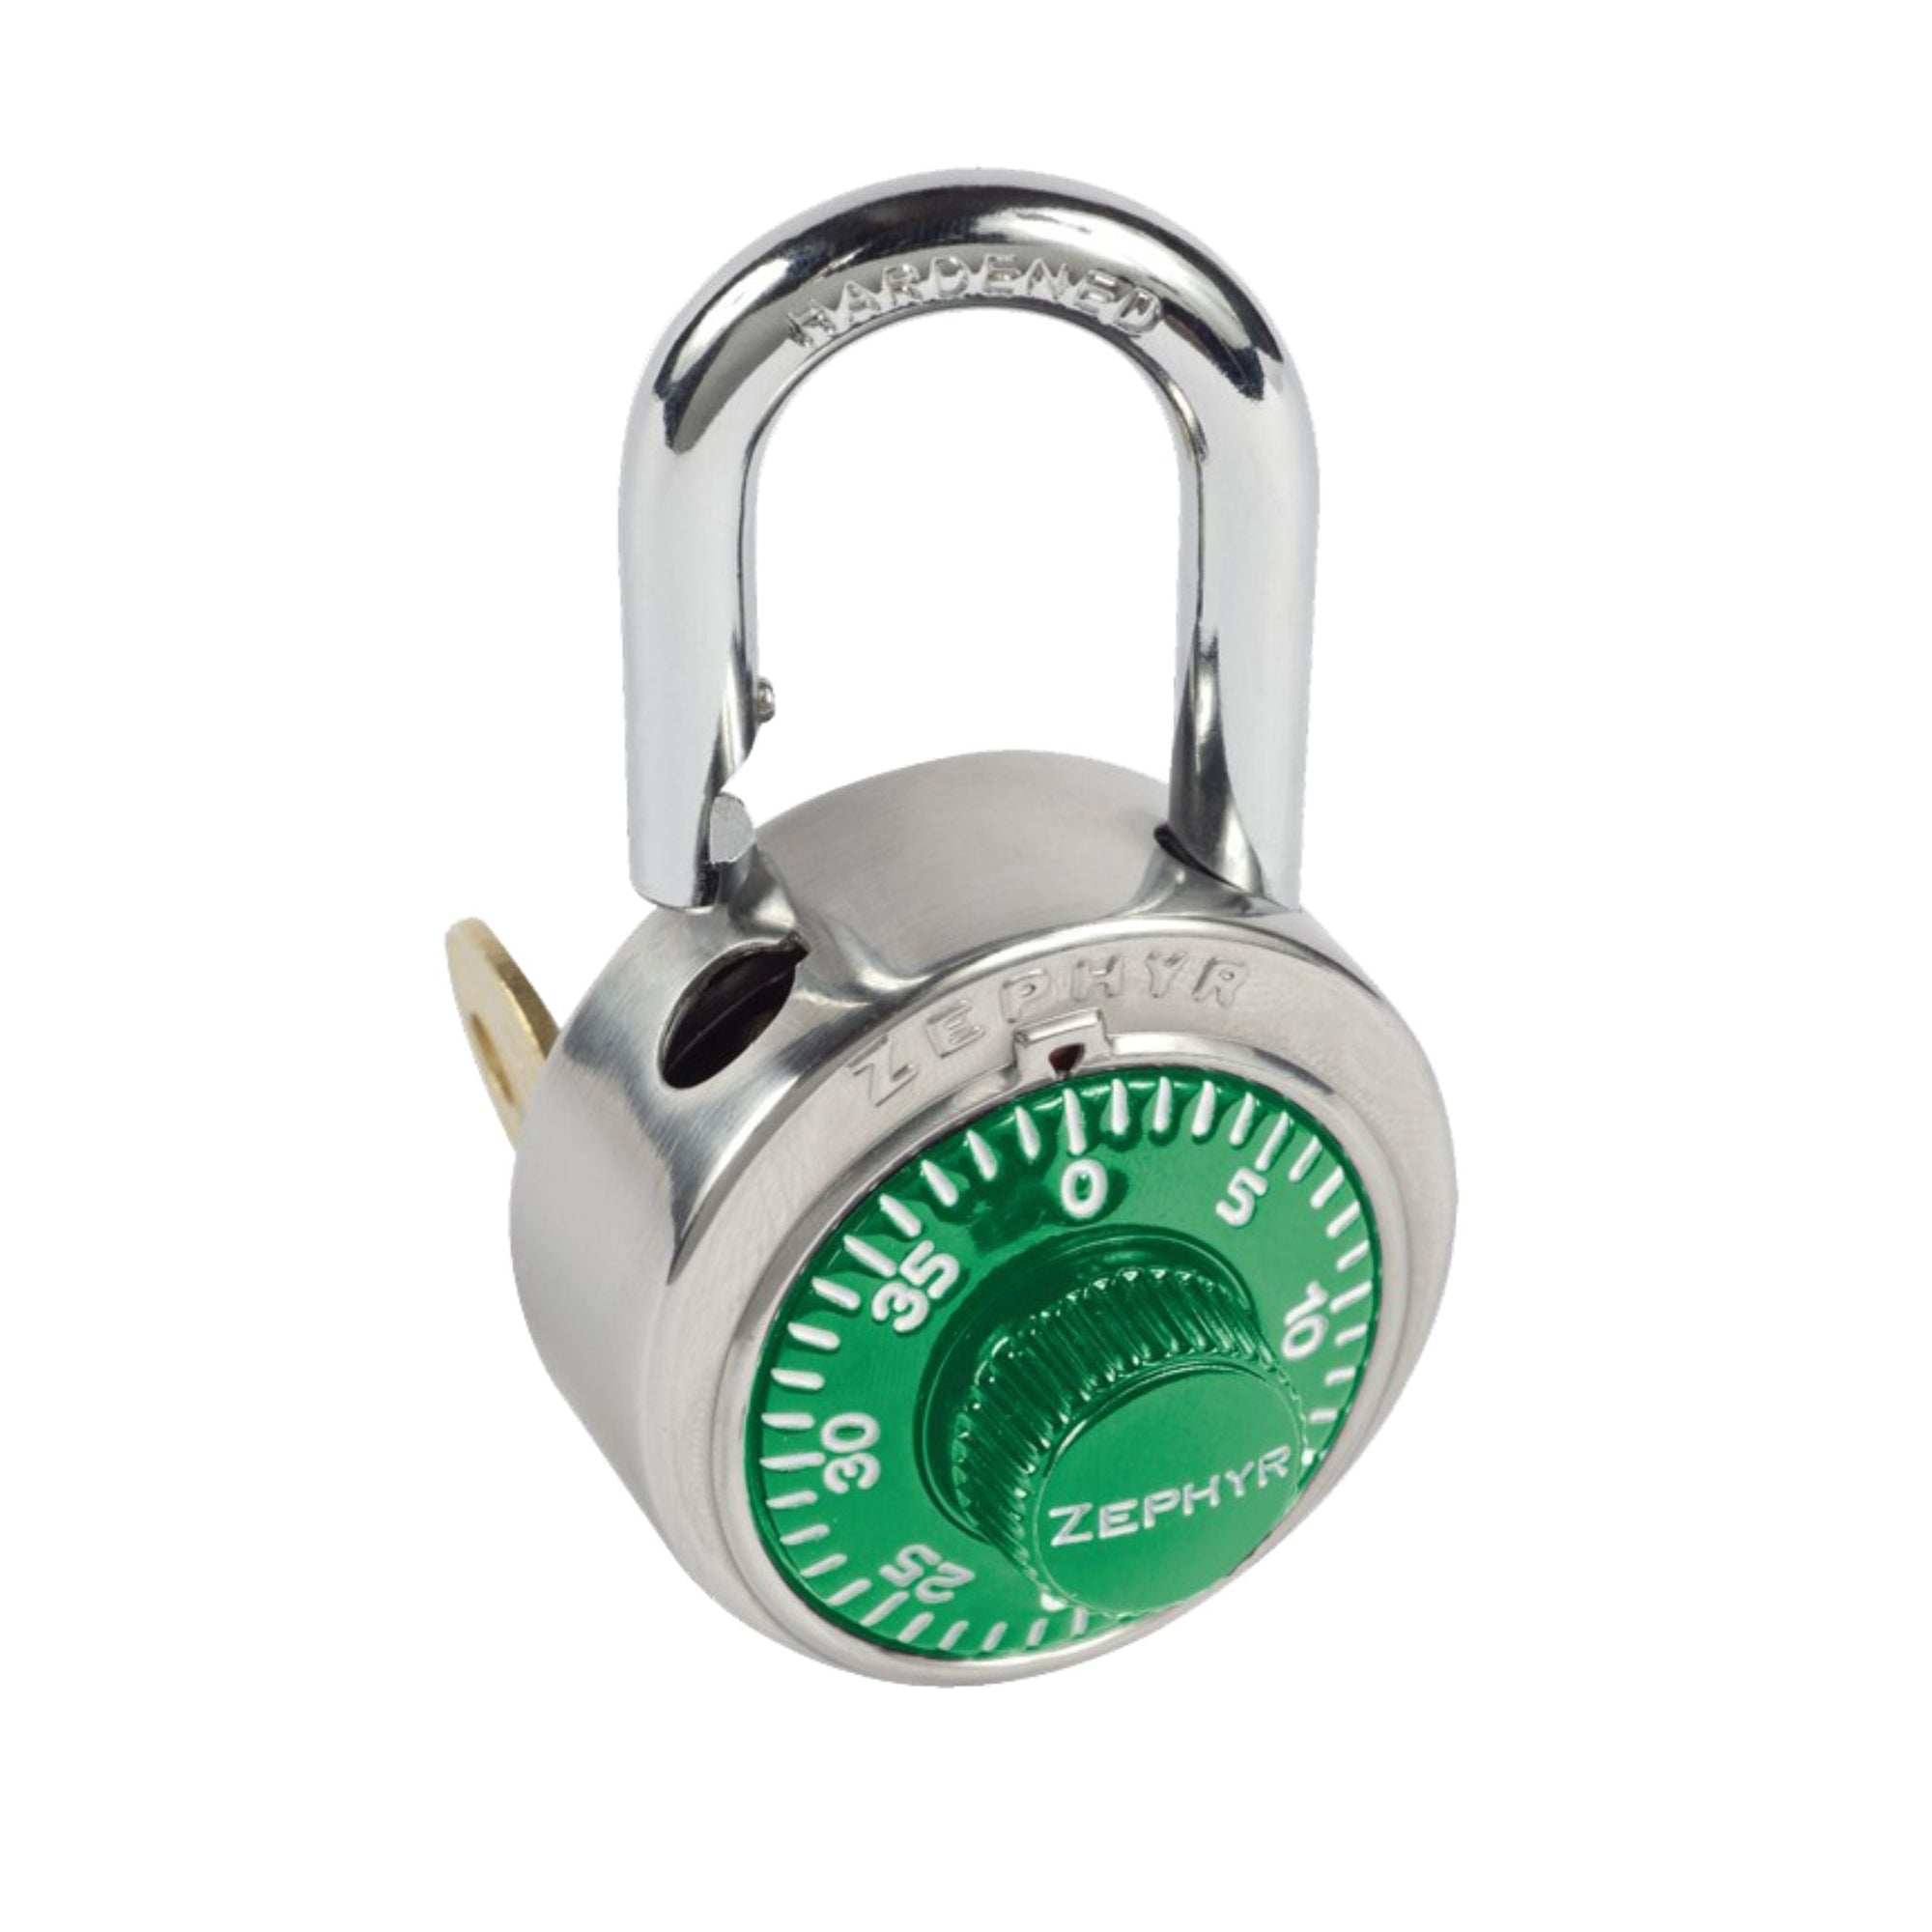 Zephyr Lock 1925GRN Locker Locks Feature 3-Digit Dialing (Green Dial) With Control Key Override for Supervisory Access - The Lock Source